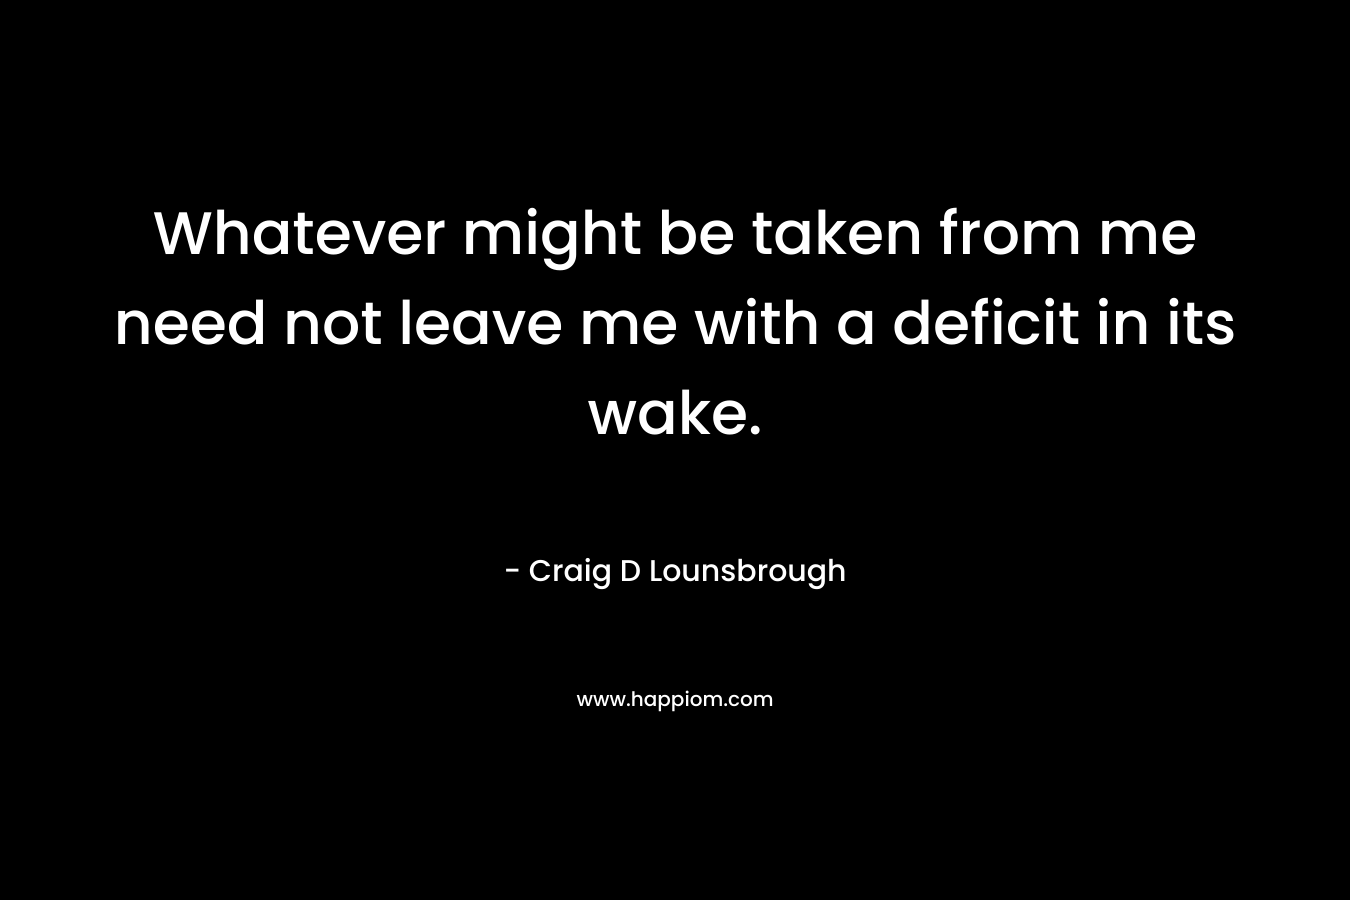 Whatever might be taken from me need not leave me with a deficit in its wake. – Craig D Lounsbrough